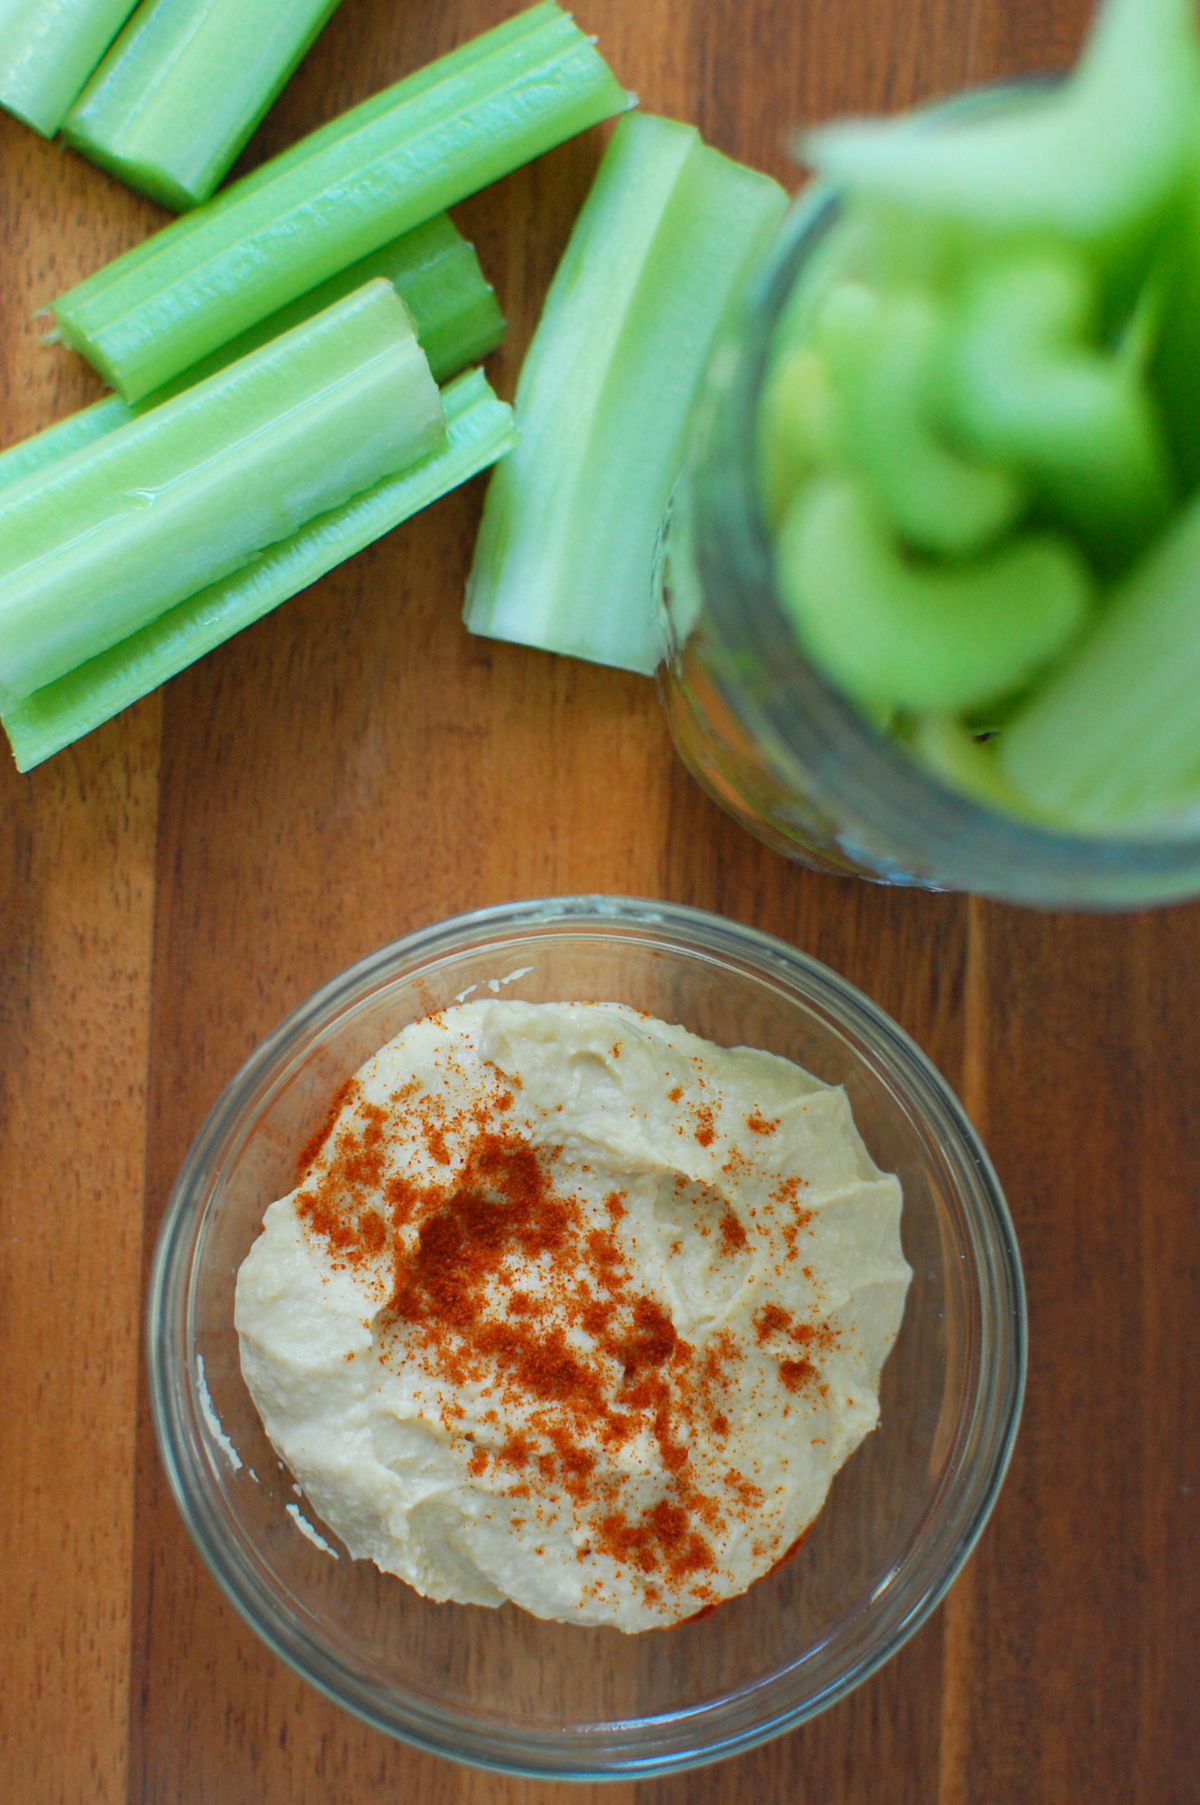 20 Easy Snacks to Add to Your Client's Next Meal Plan: celery and hummus